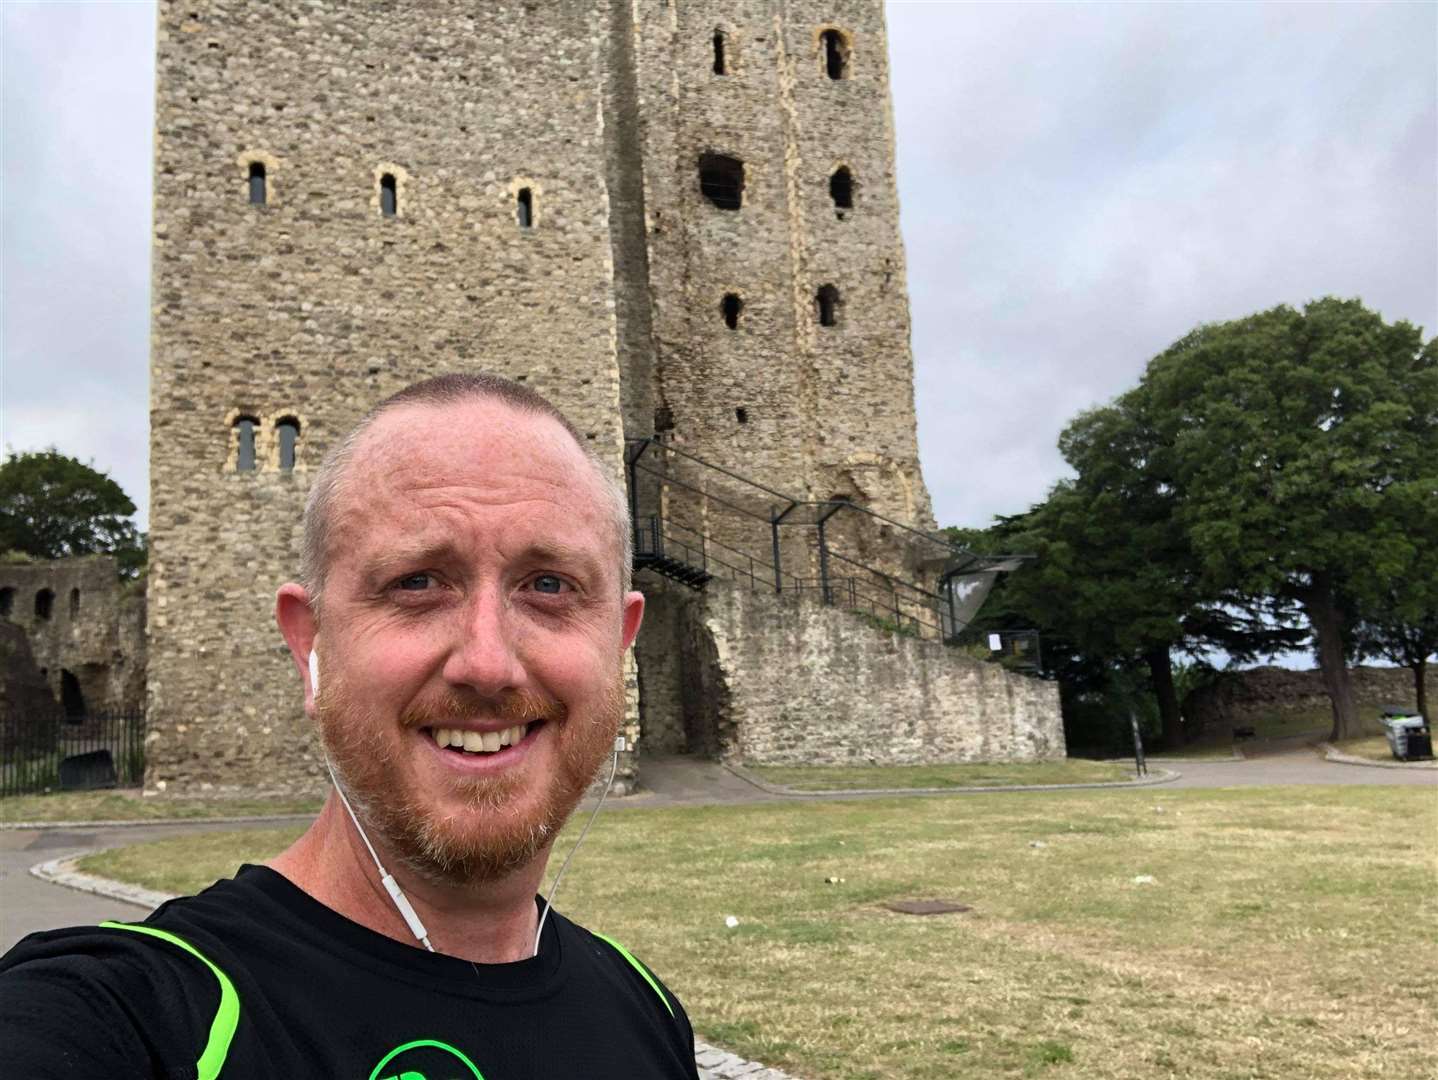 Paul Beaney completed an unexpected marathon distance and even had time for a selfie at Rochester Castle (39922014)